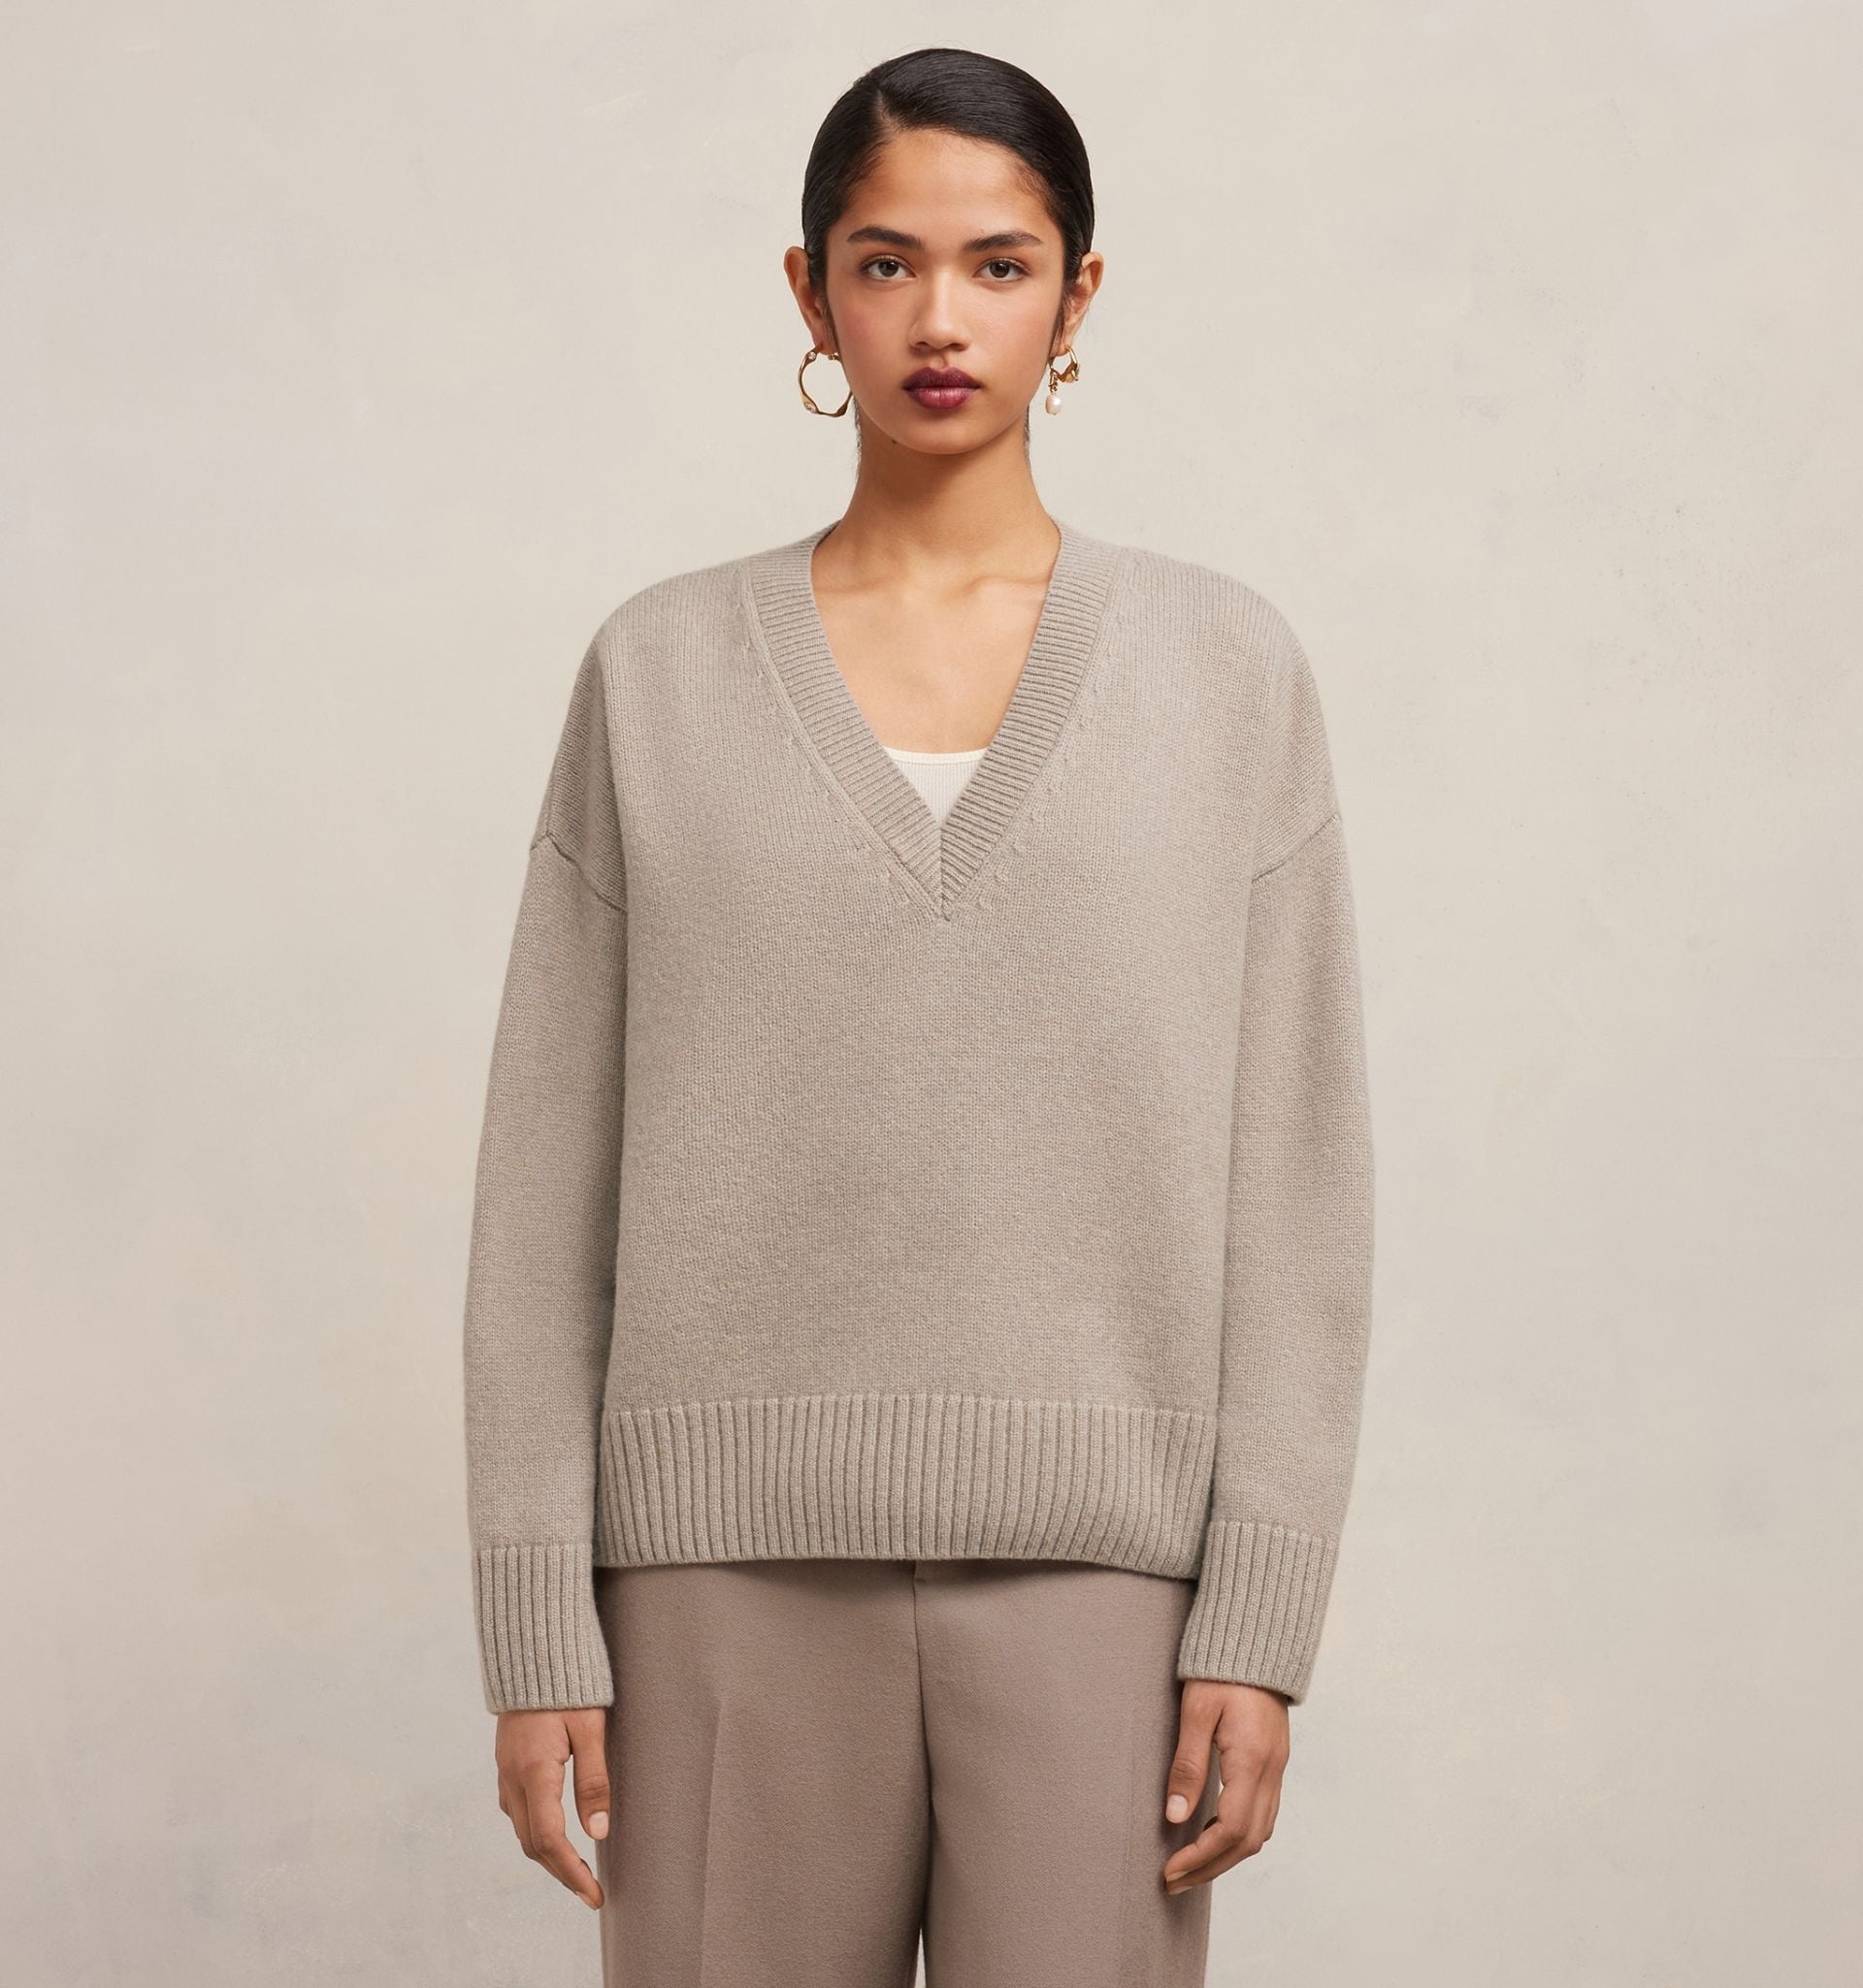 Wool Cashmere Sweater - 7